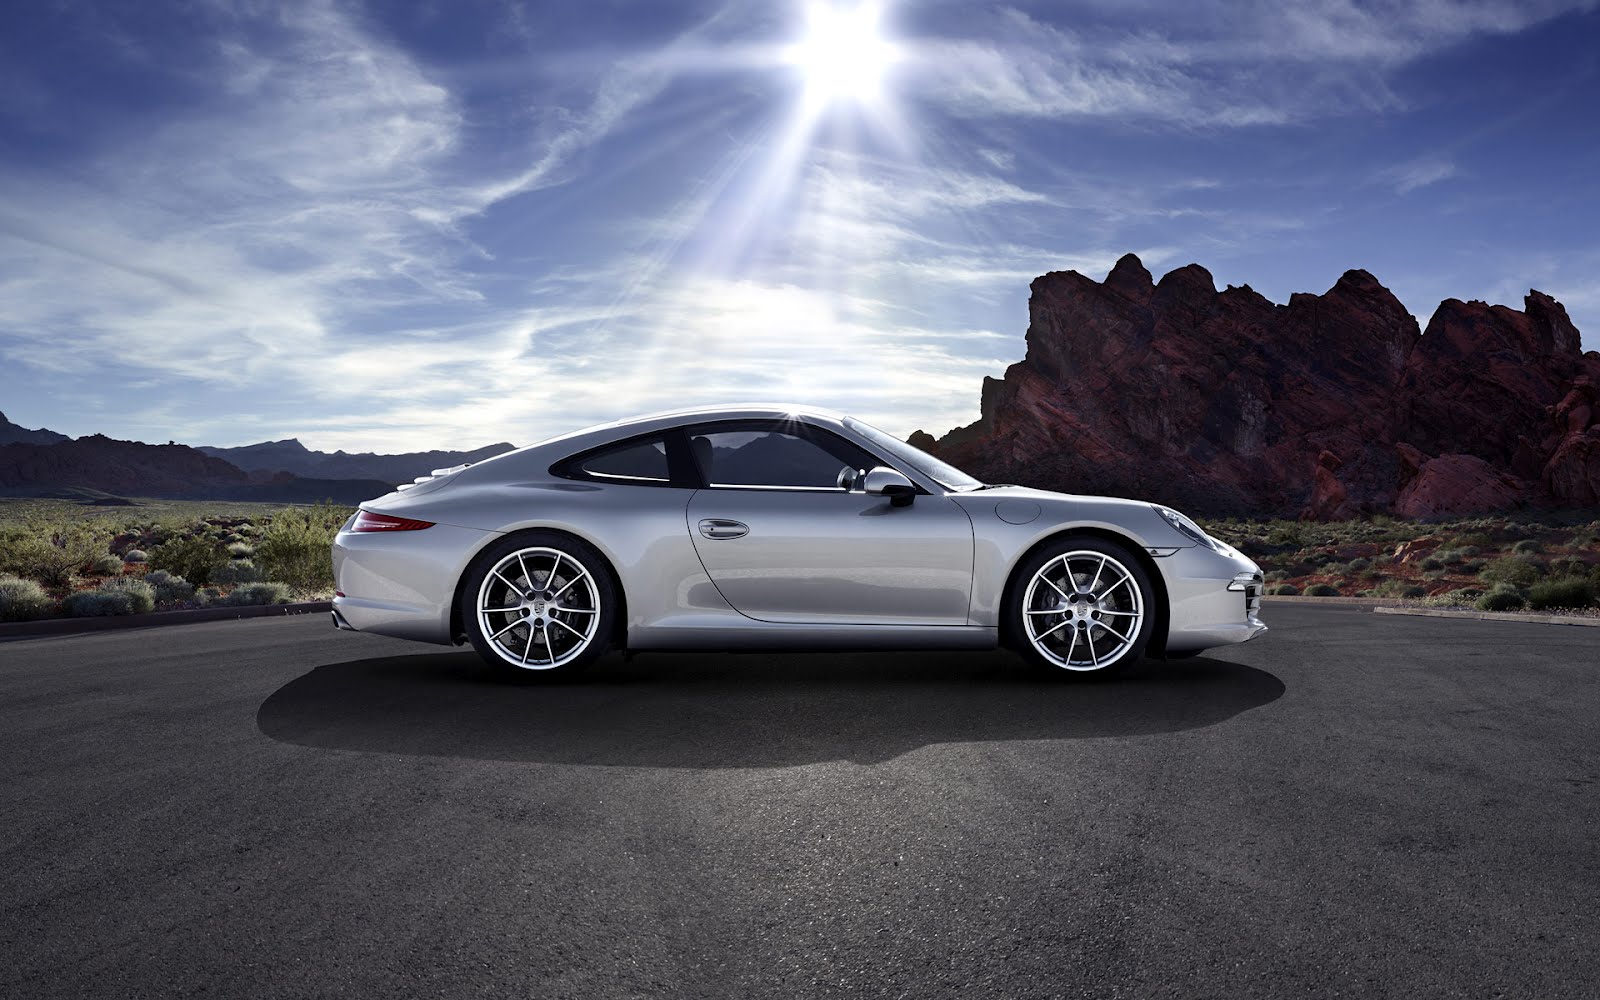 Porsche hd wallpapers Porsche hd wallpaper Porsche 911 hd wallpapers